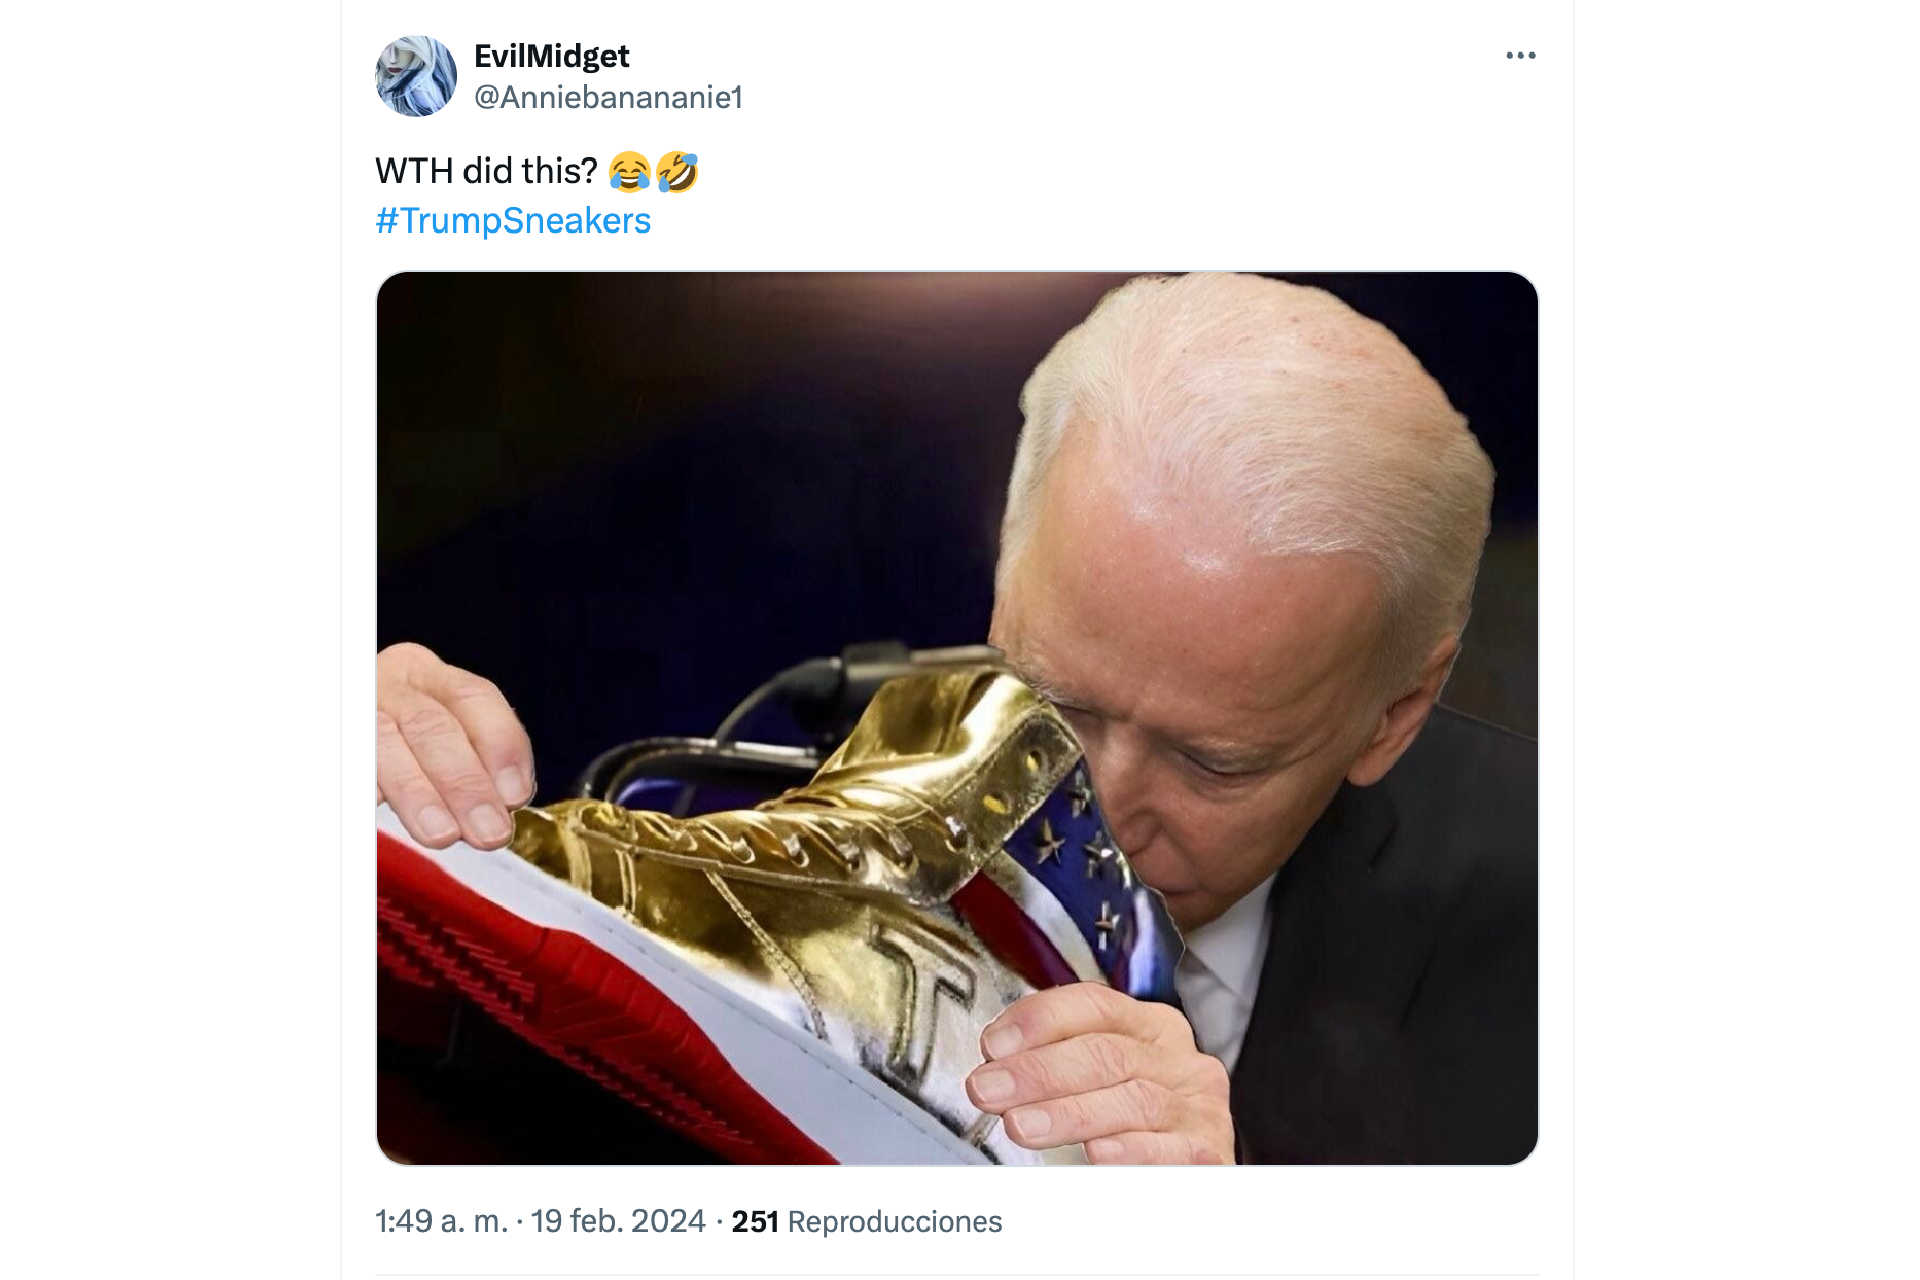 Another from Biden